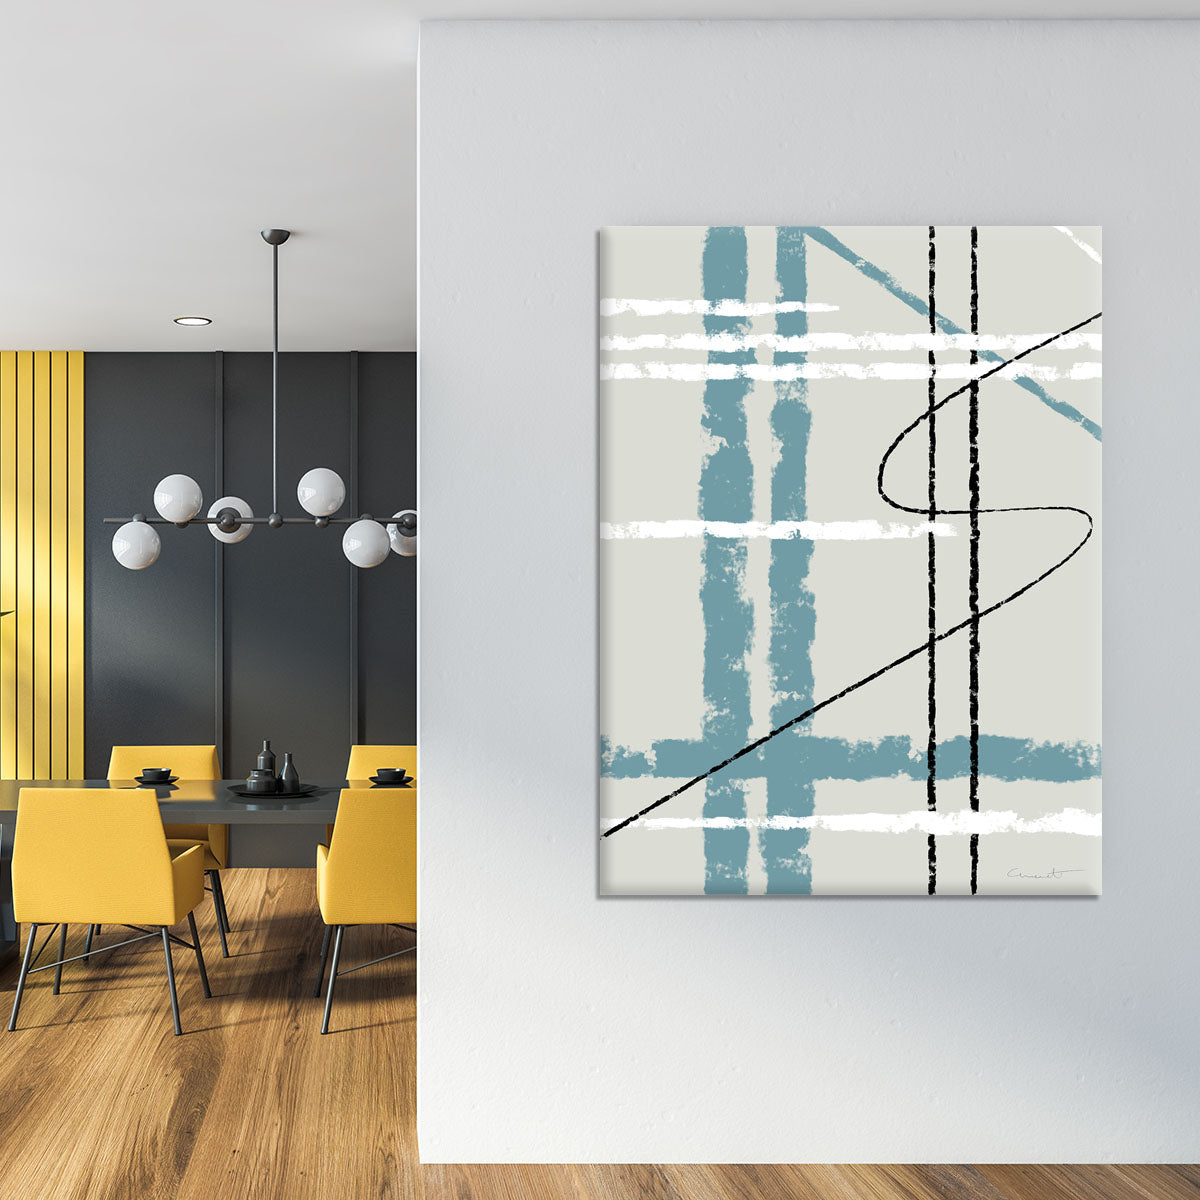 Messy Lines Canvas Print or Poster - 1x - 4